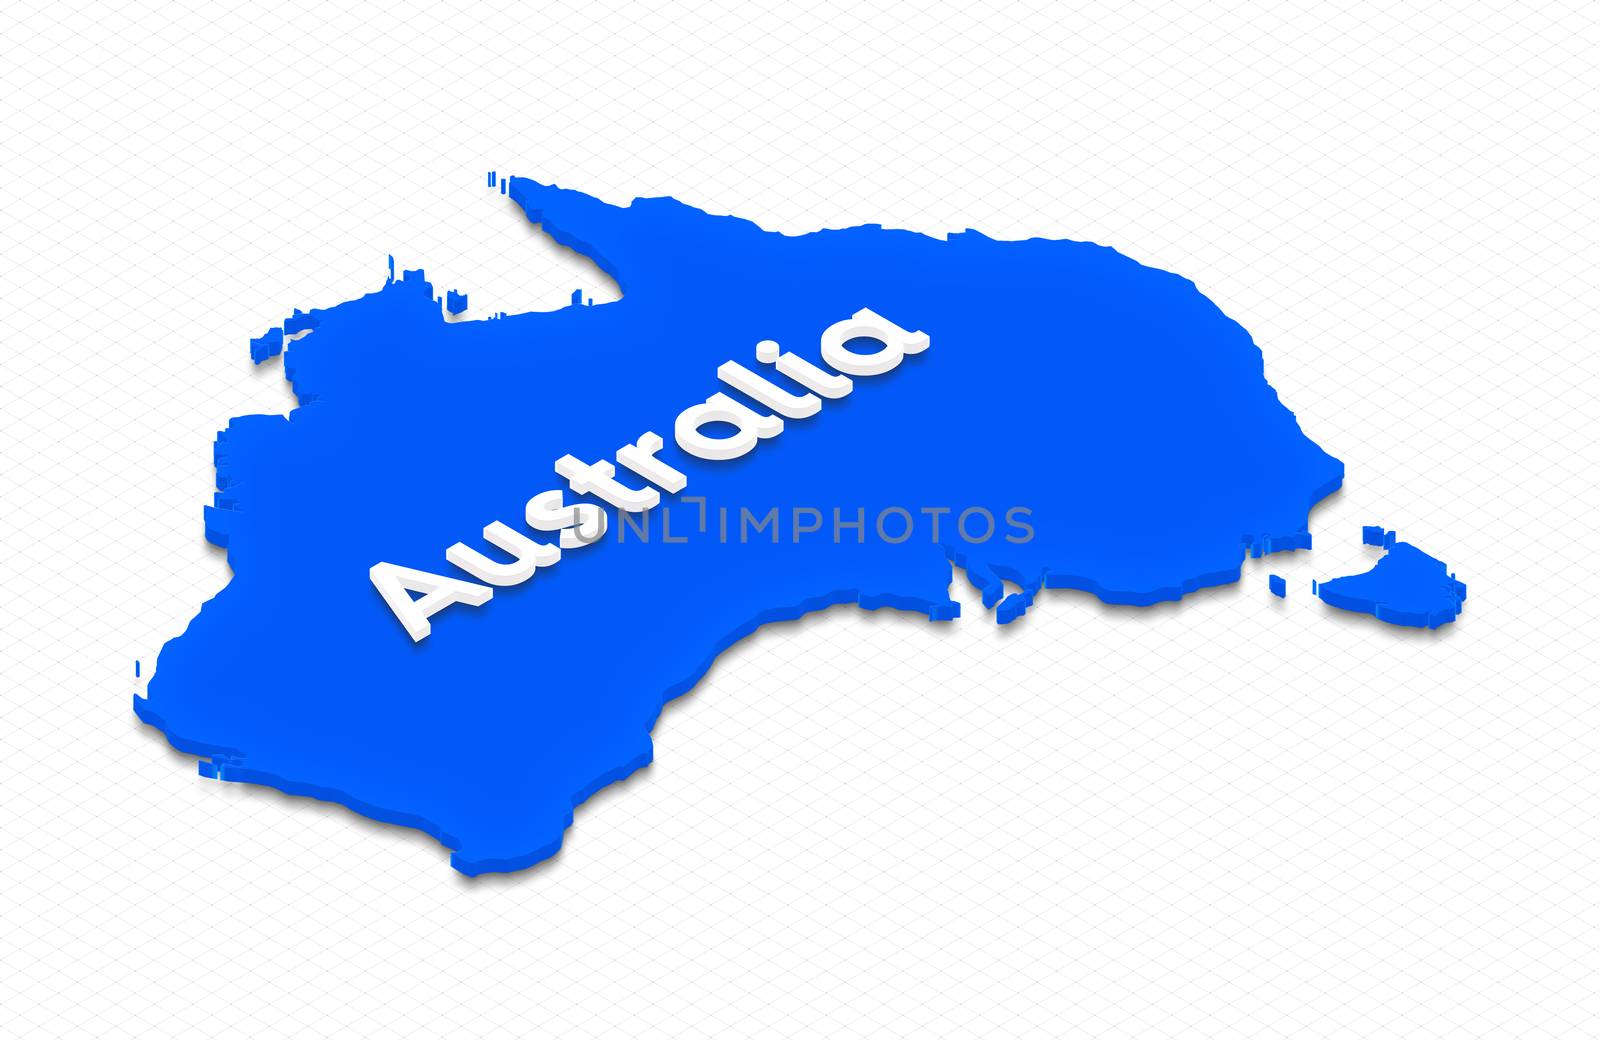 Illustration of a blue ground map of Australia on grid background. Right 3D isometric projection with the name of continent.